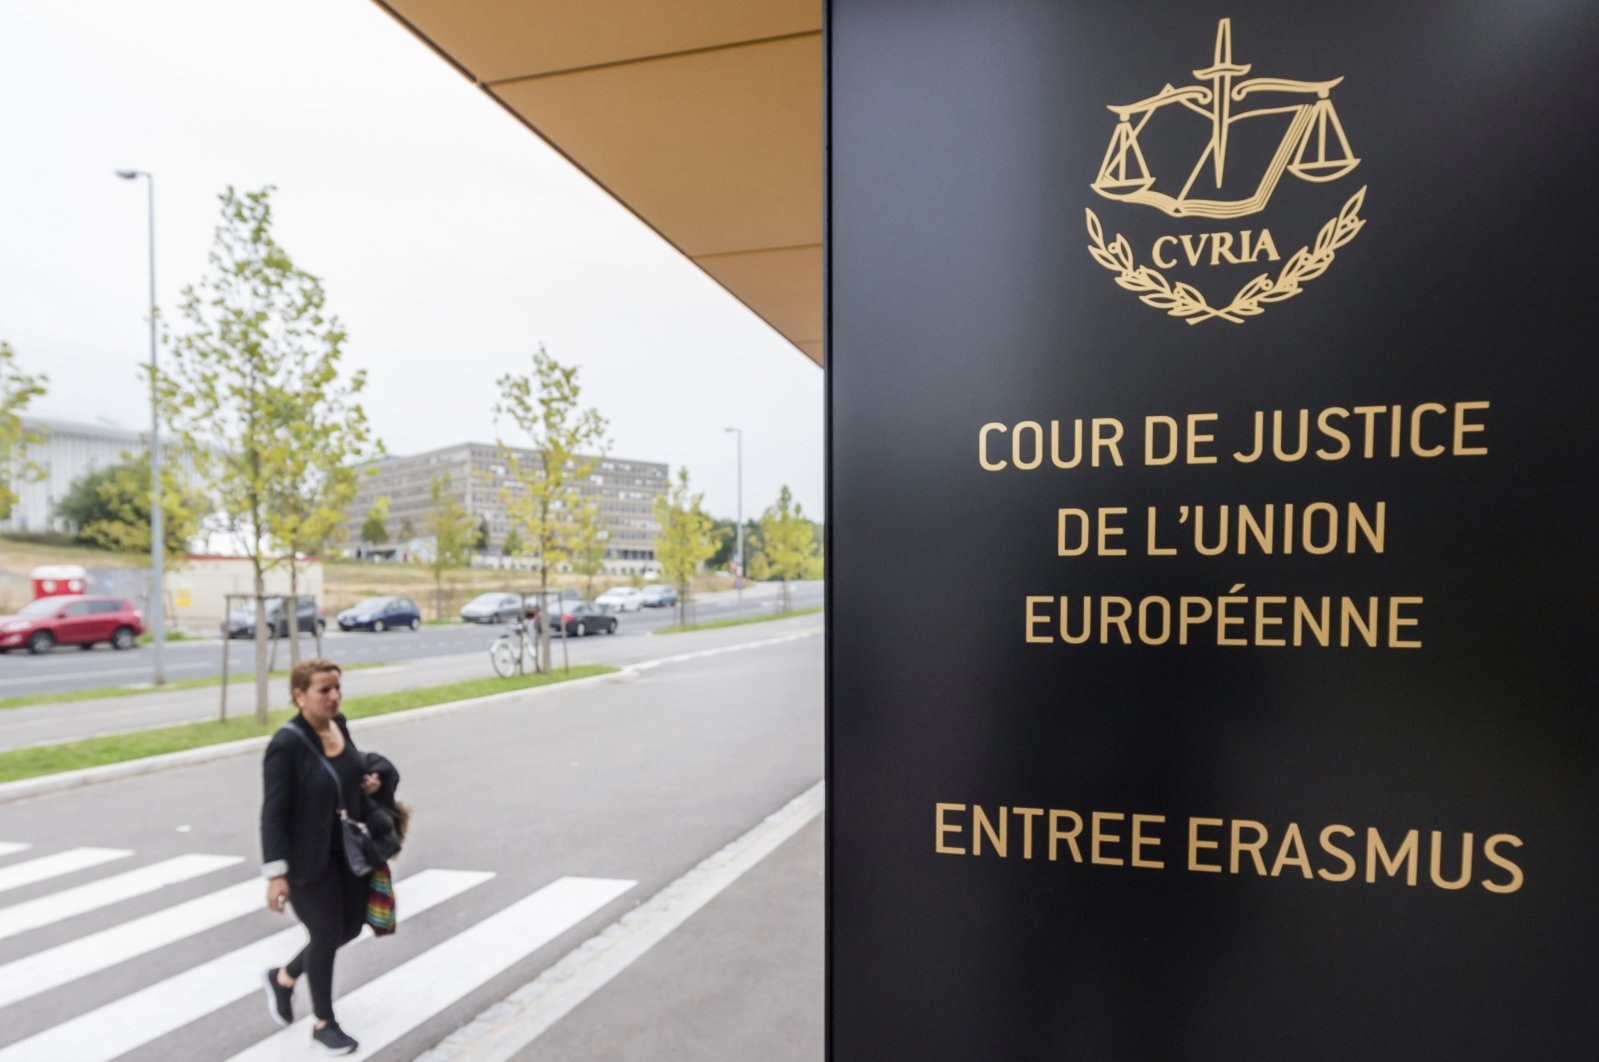 The entrance to the EU Court of Justice in Luxembourg, Oct. 5, 2015. (AP Photo)